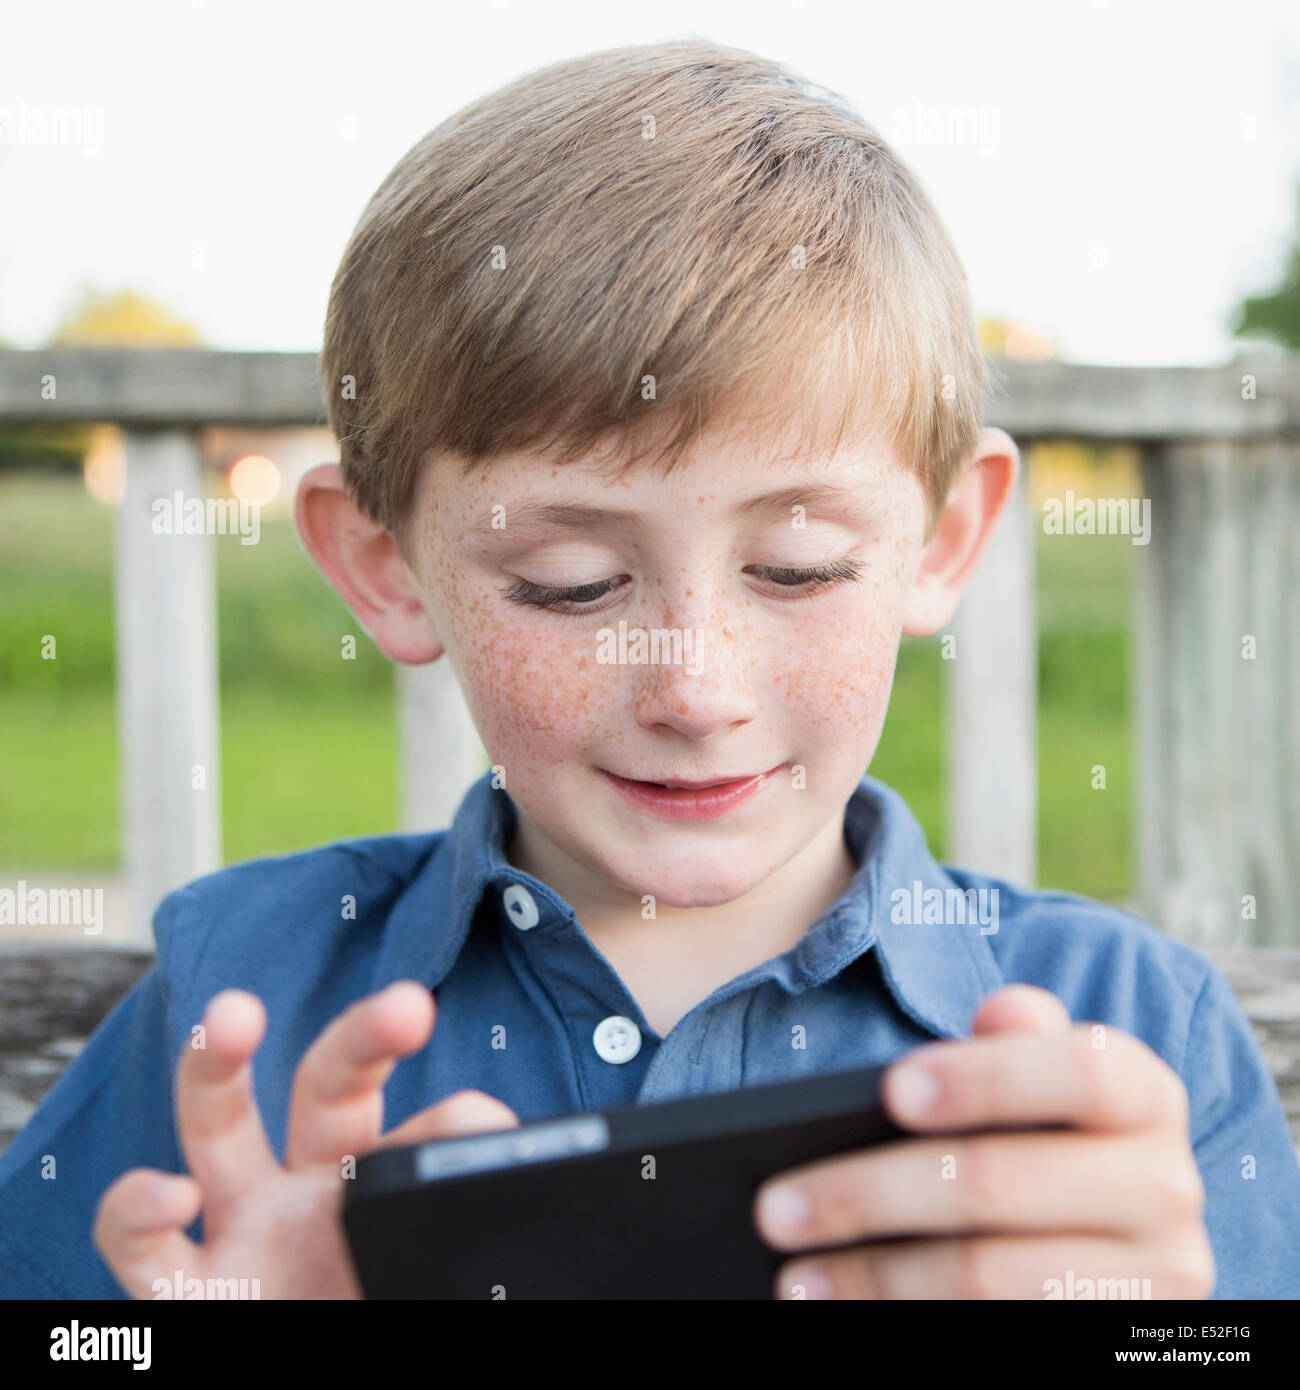 A young boy outdoors. Stock Photo